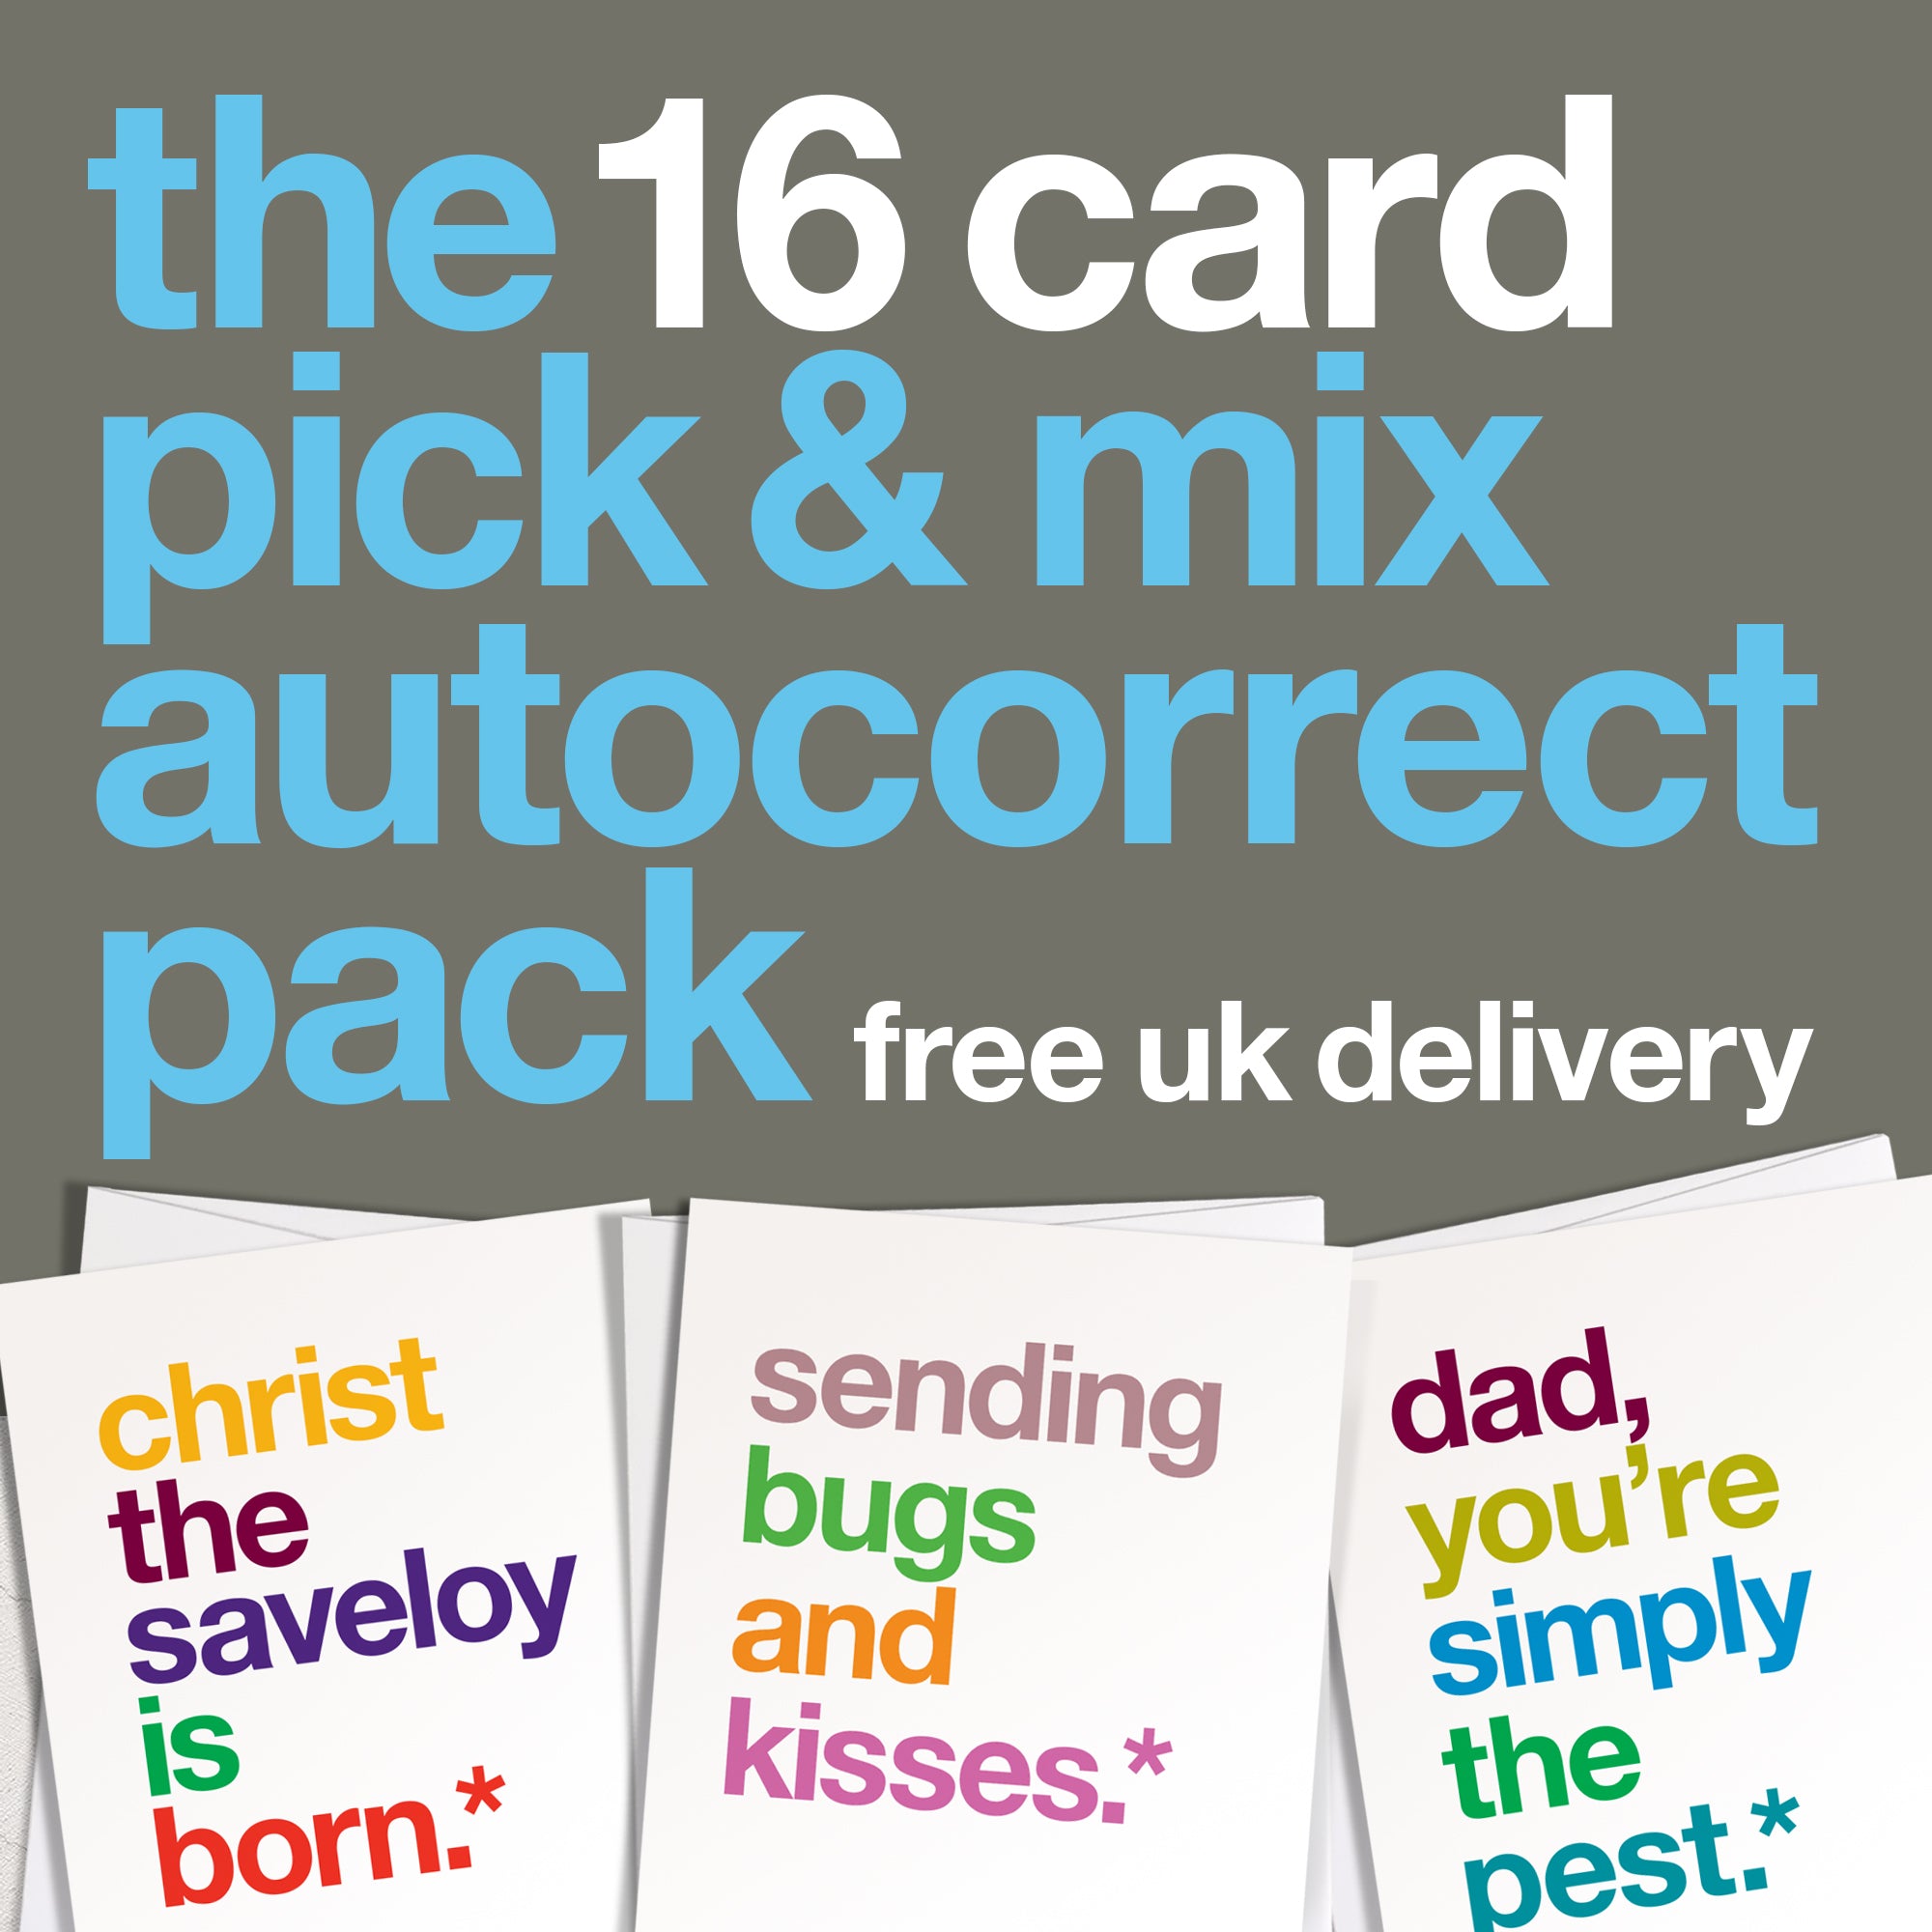 A graphic showing a pick and mix choice of 16 funny autocorrect greetings cards.